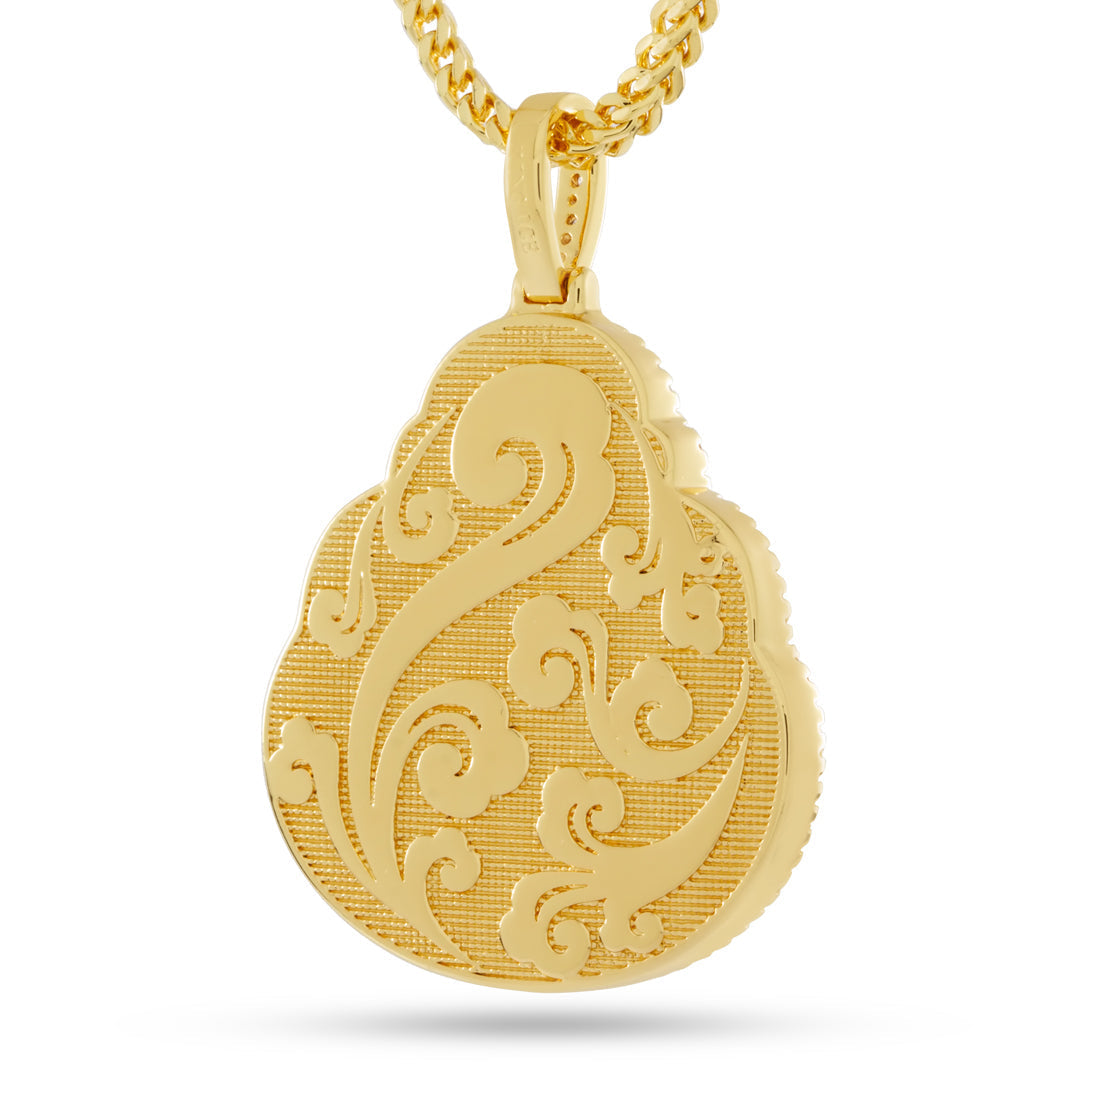 Buy Happy Laughing Buddha Red Jade Pendant Necklace Figaro Gold Chain  Genuine Certified Grade A Jadeite Jade Hand Crafted, Jade Necklace, 14k Gold  Filled Laughing Jade Buddha necklace, Jade Medallion Online at